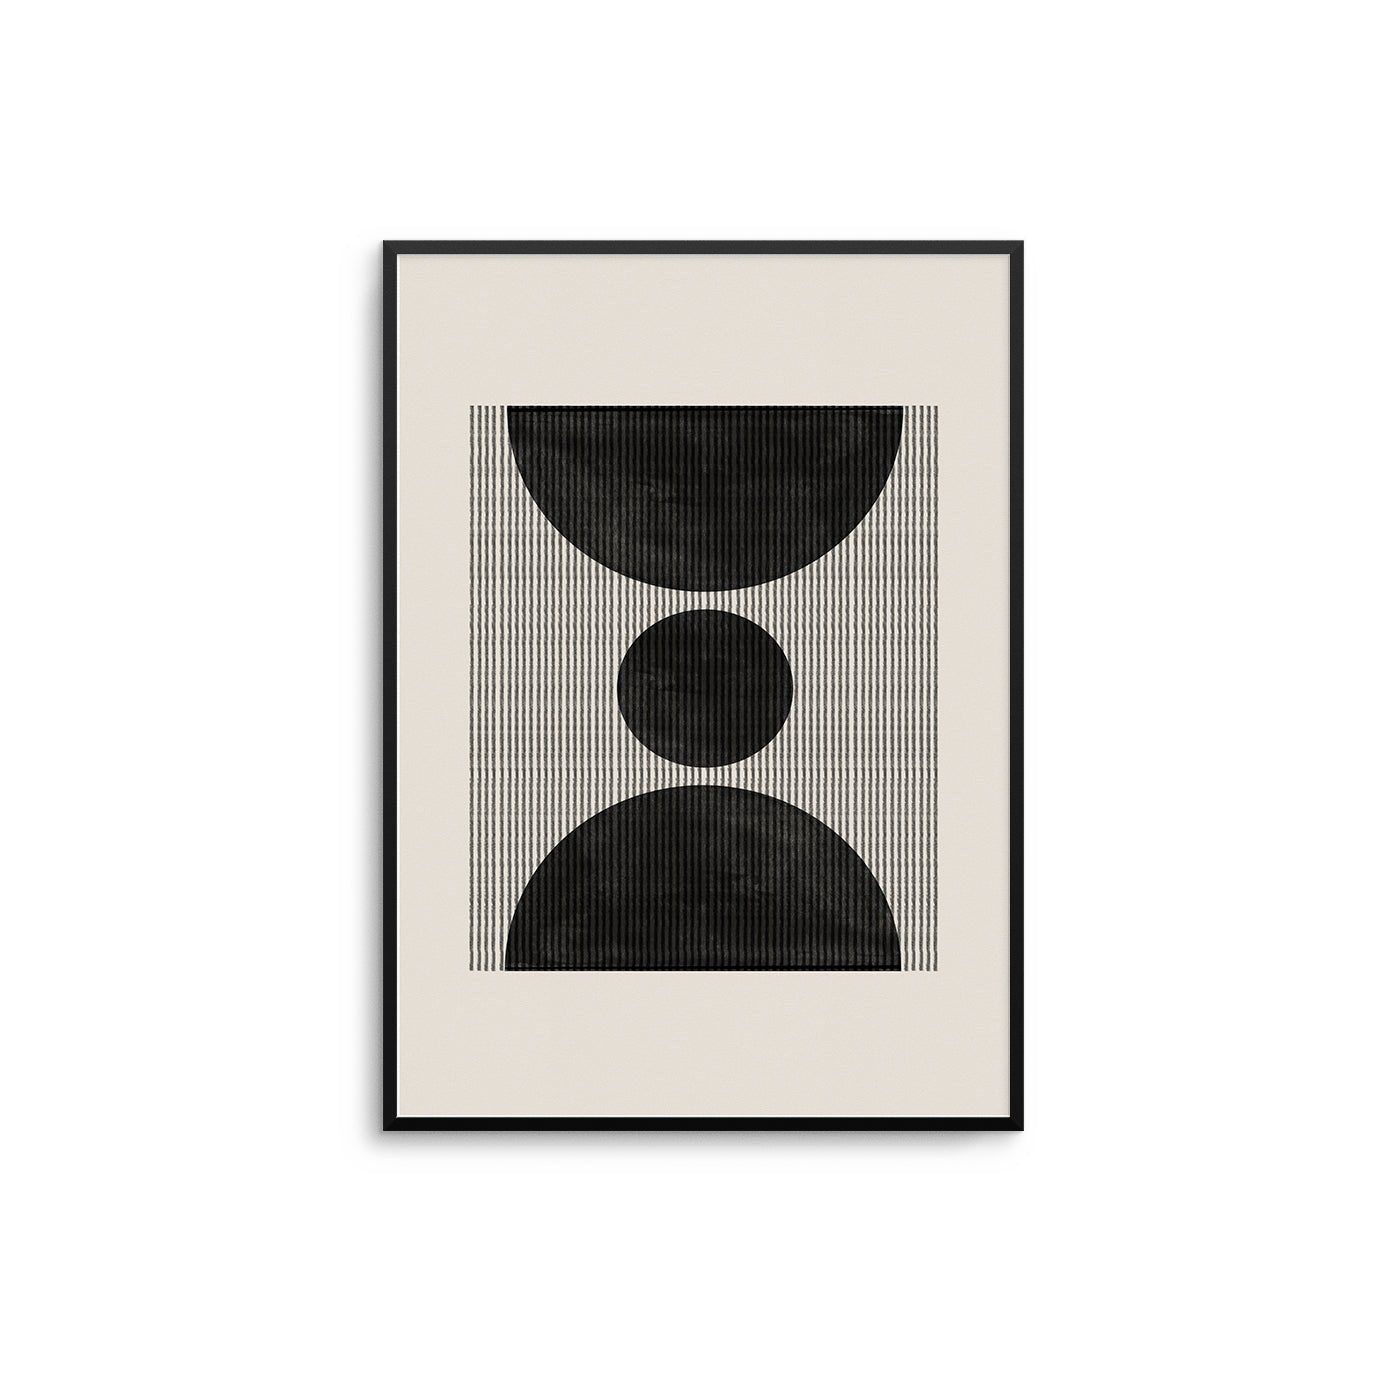 The Retro Abstract III - D'Luxe Prints